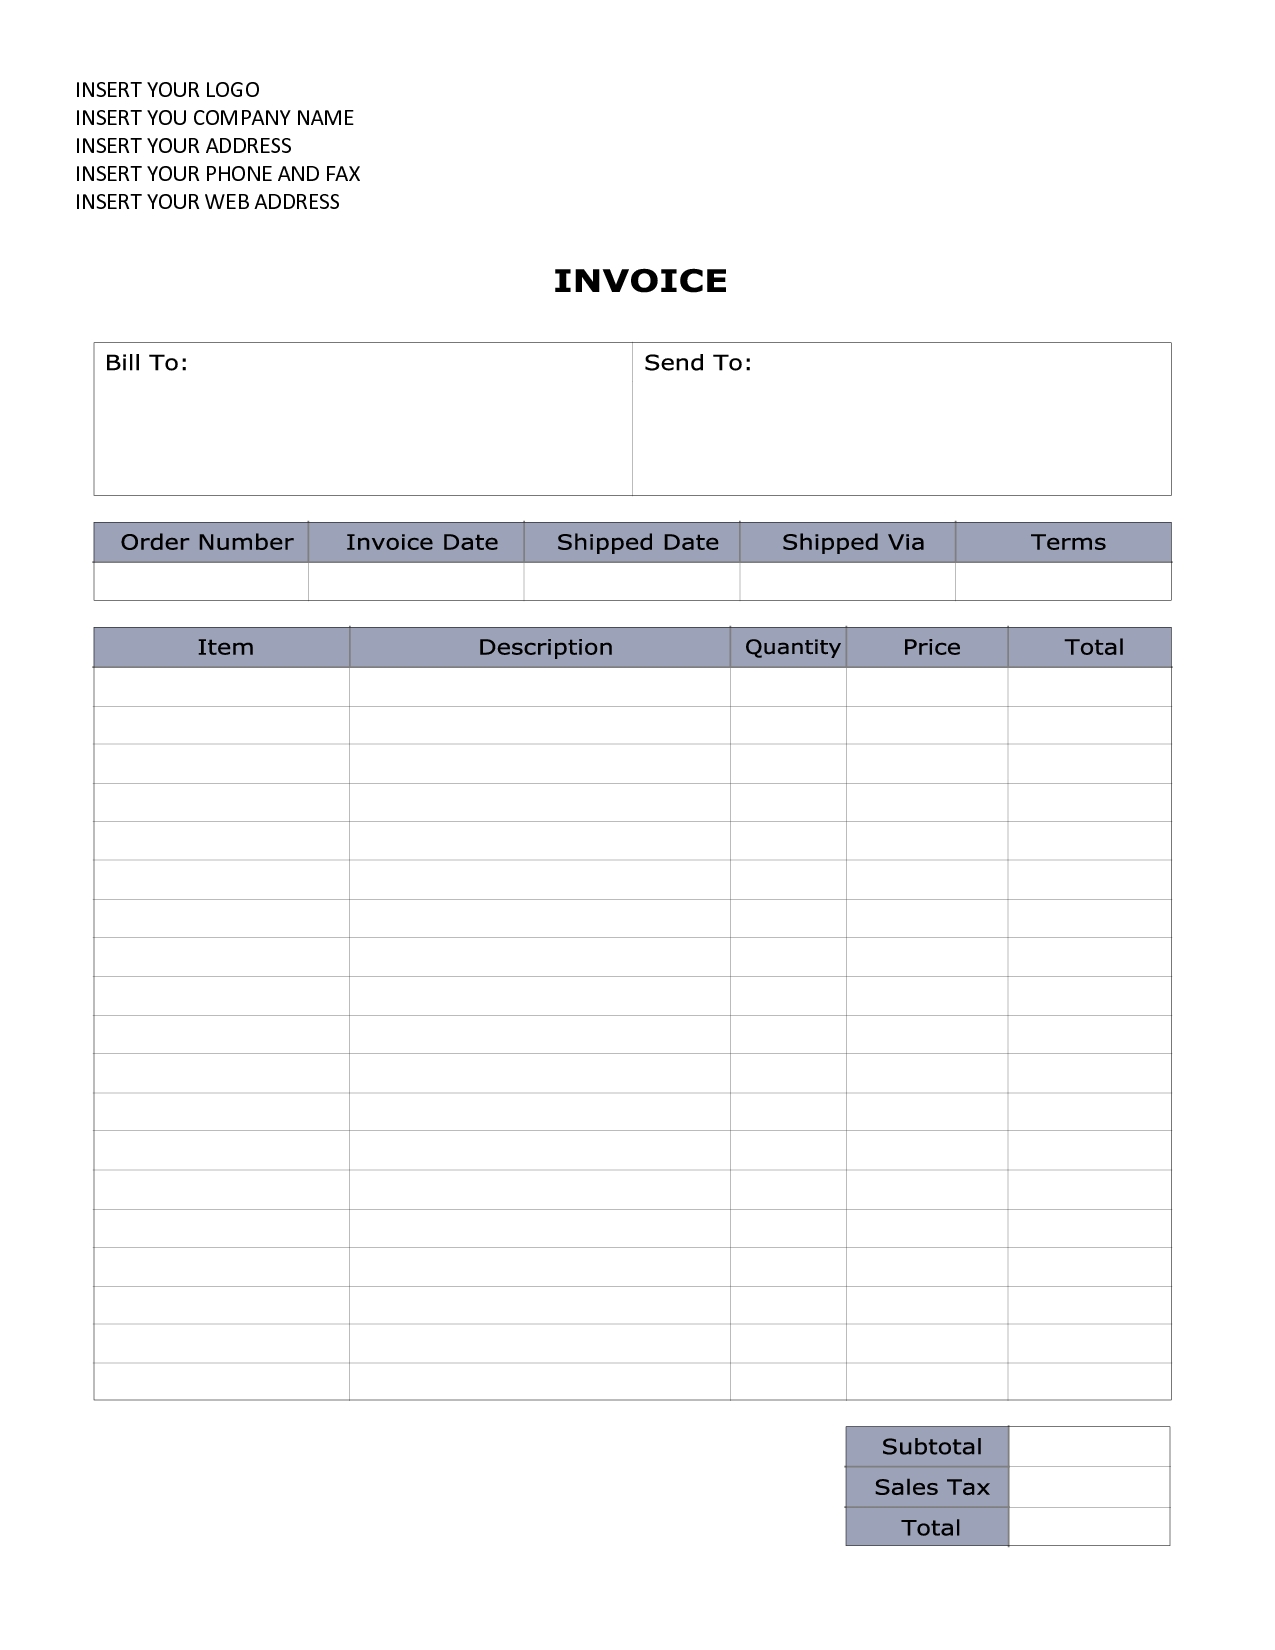 microsoft word 2007 invoice template download